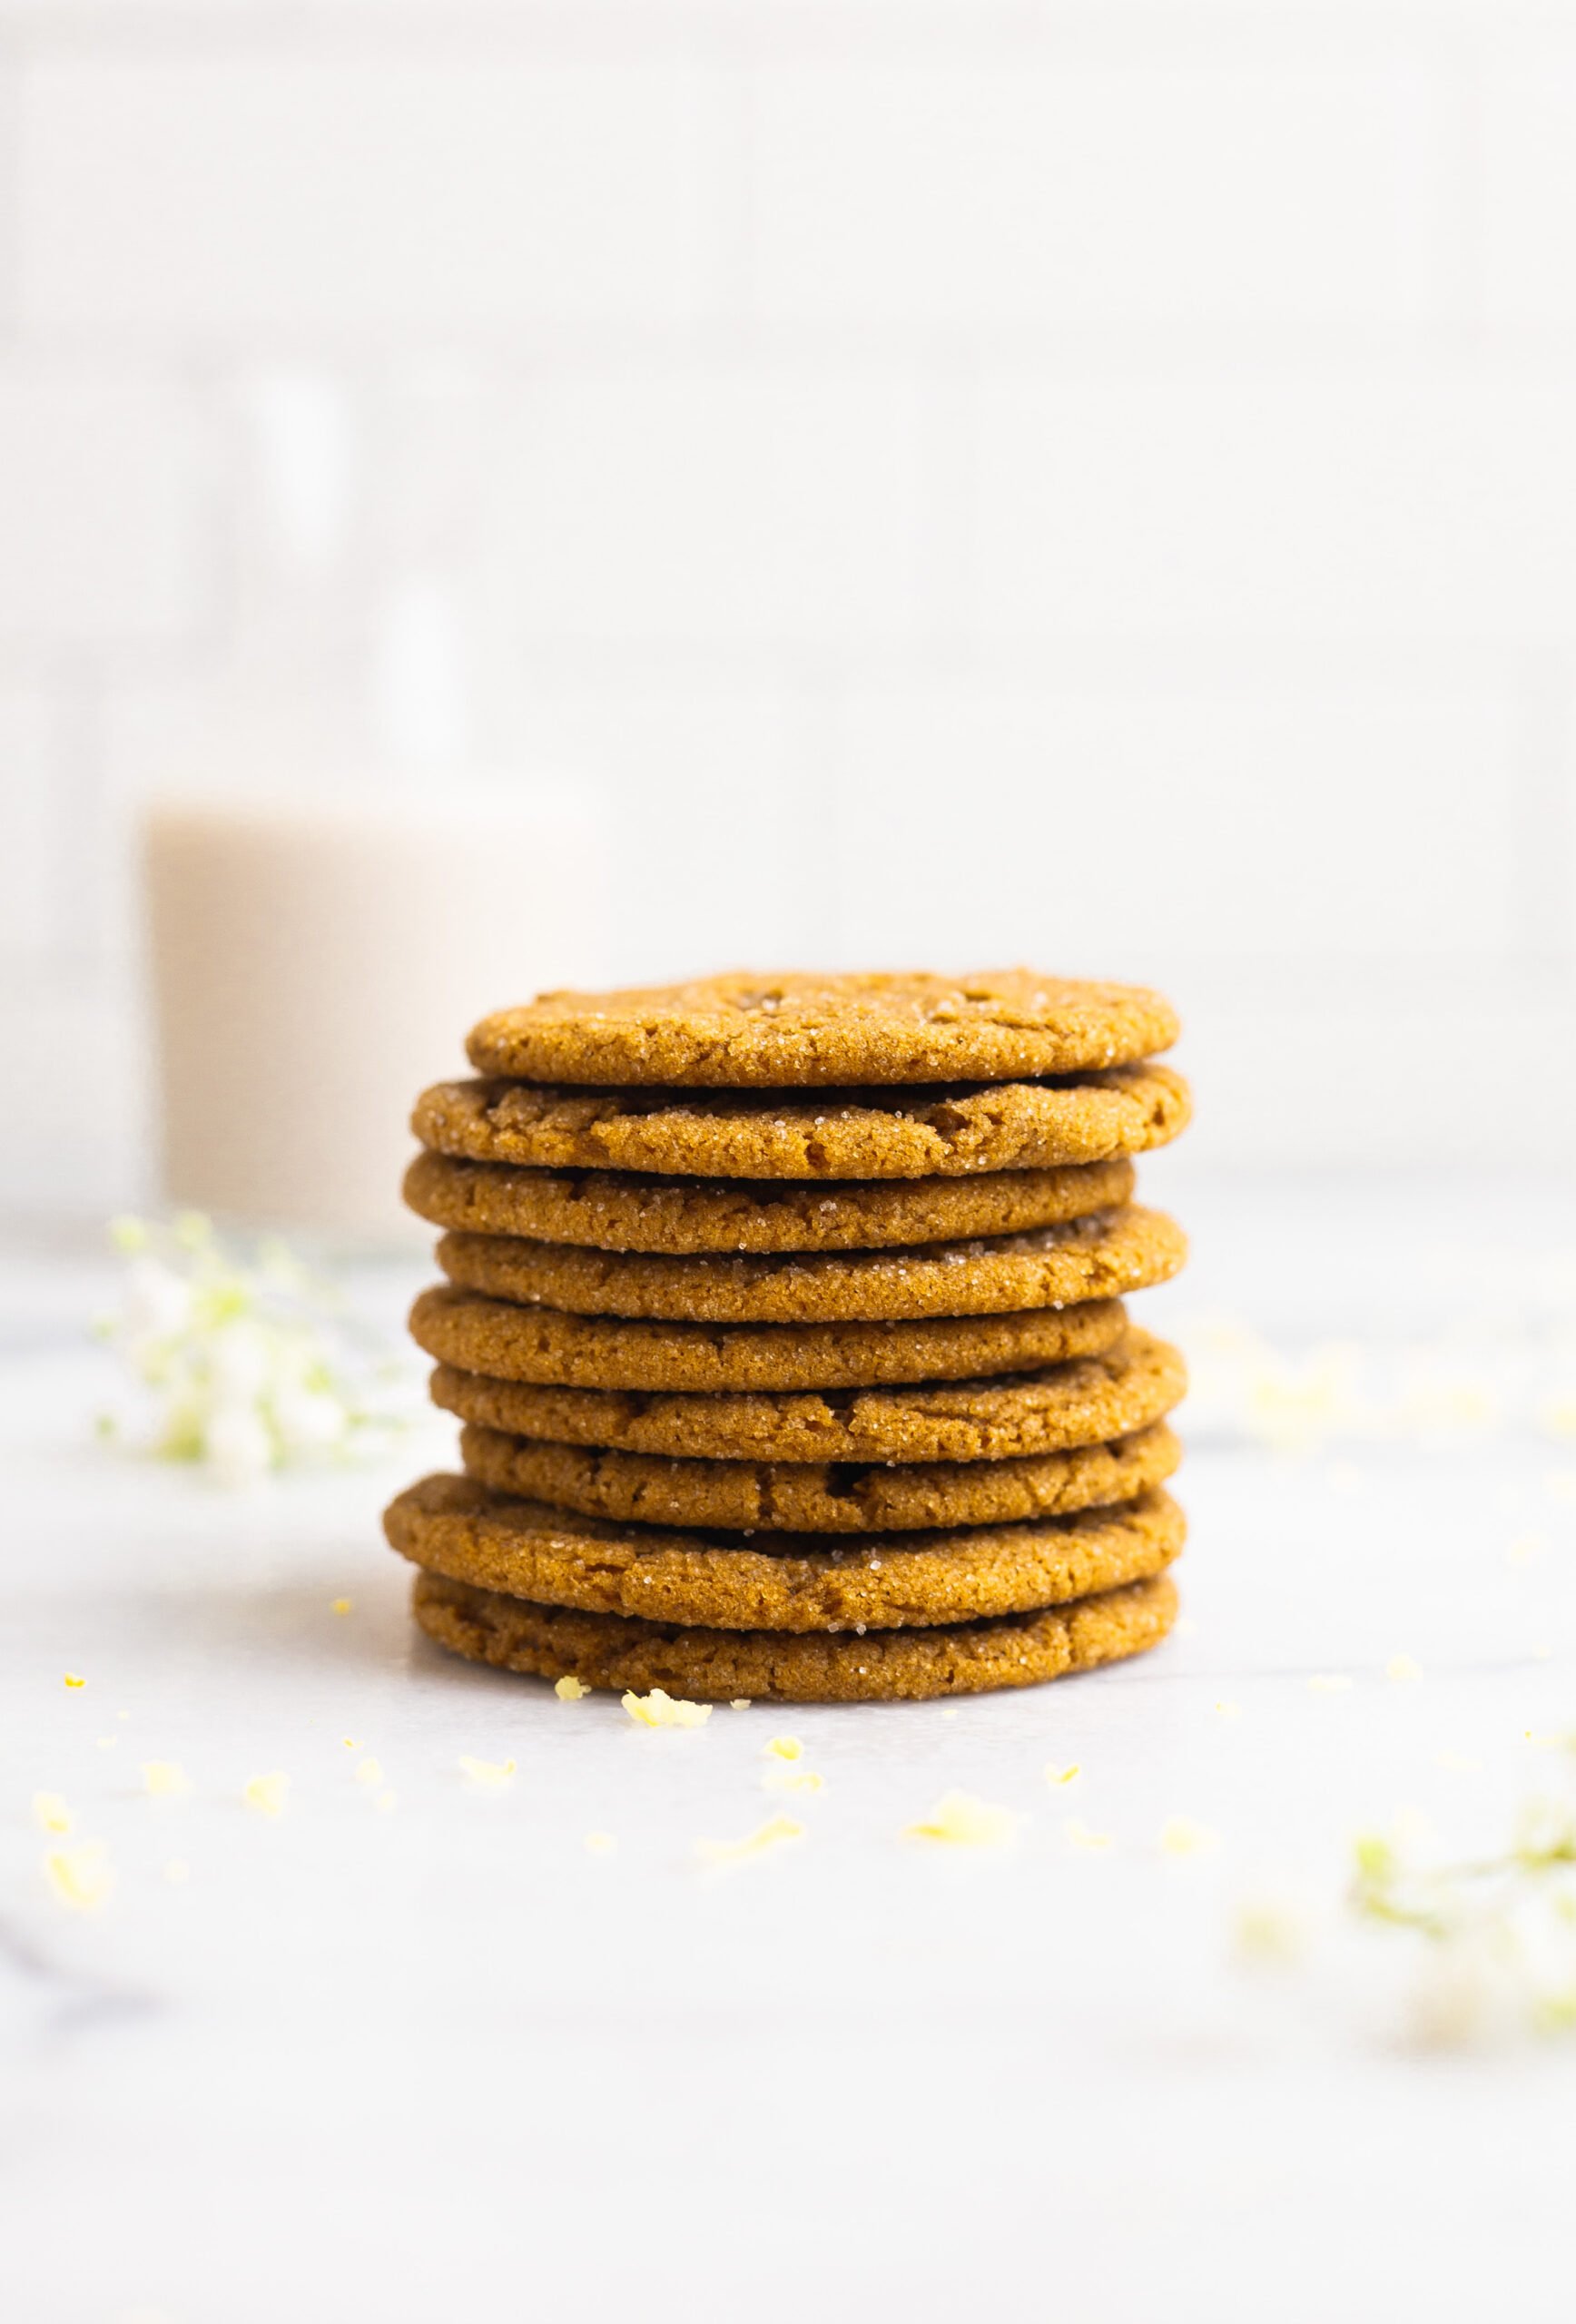 Ginger Lemon Cookies Recipe - 15 Healthy Desserts for Runners